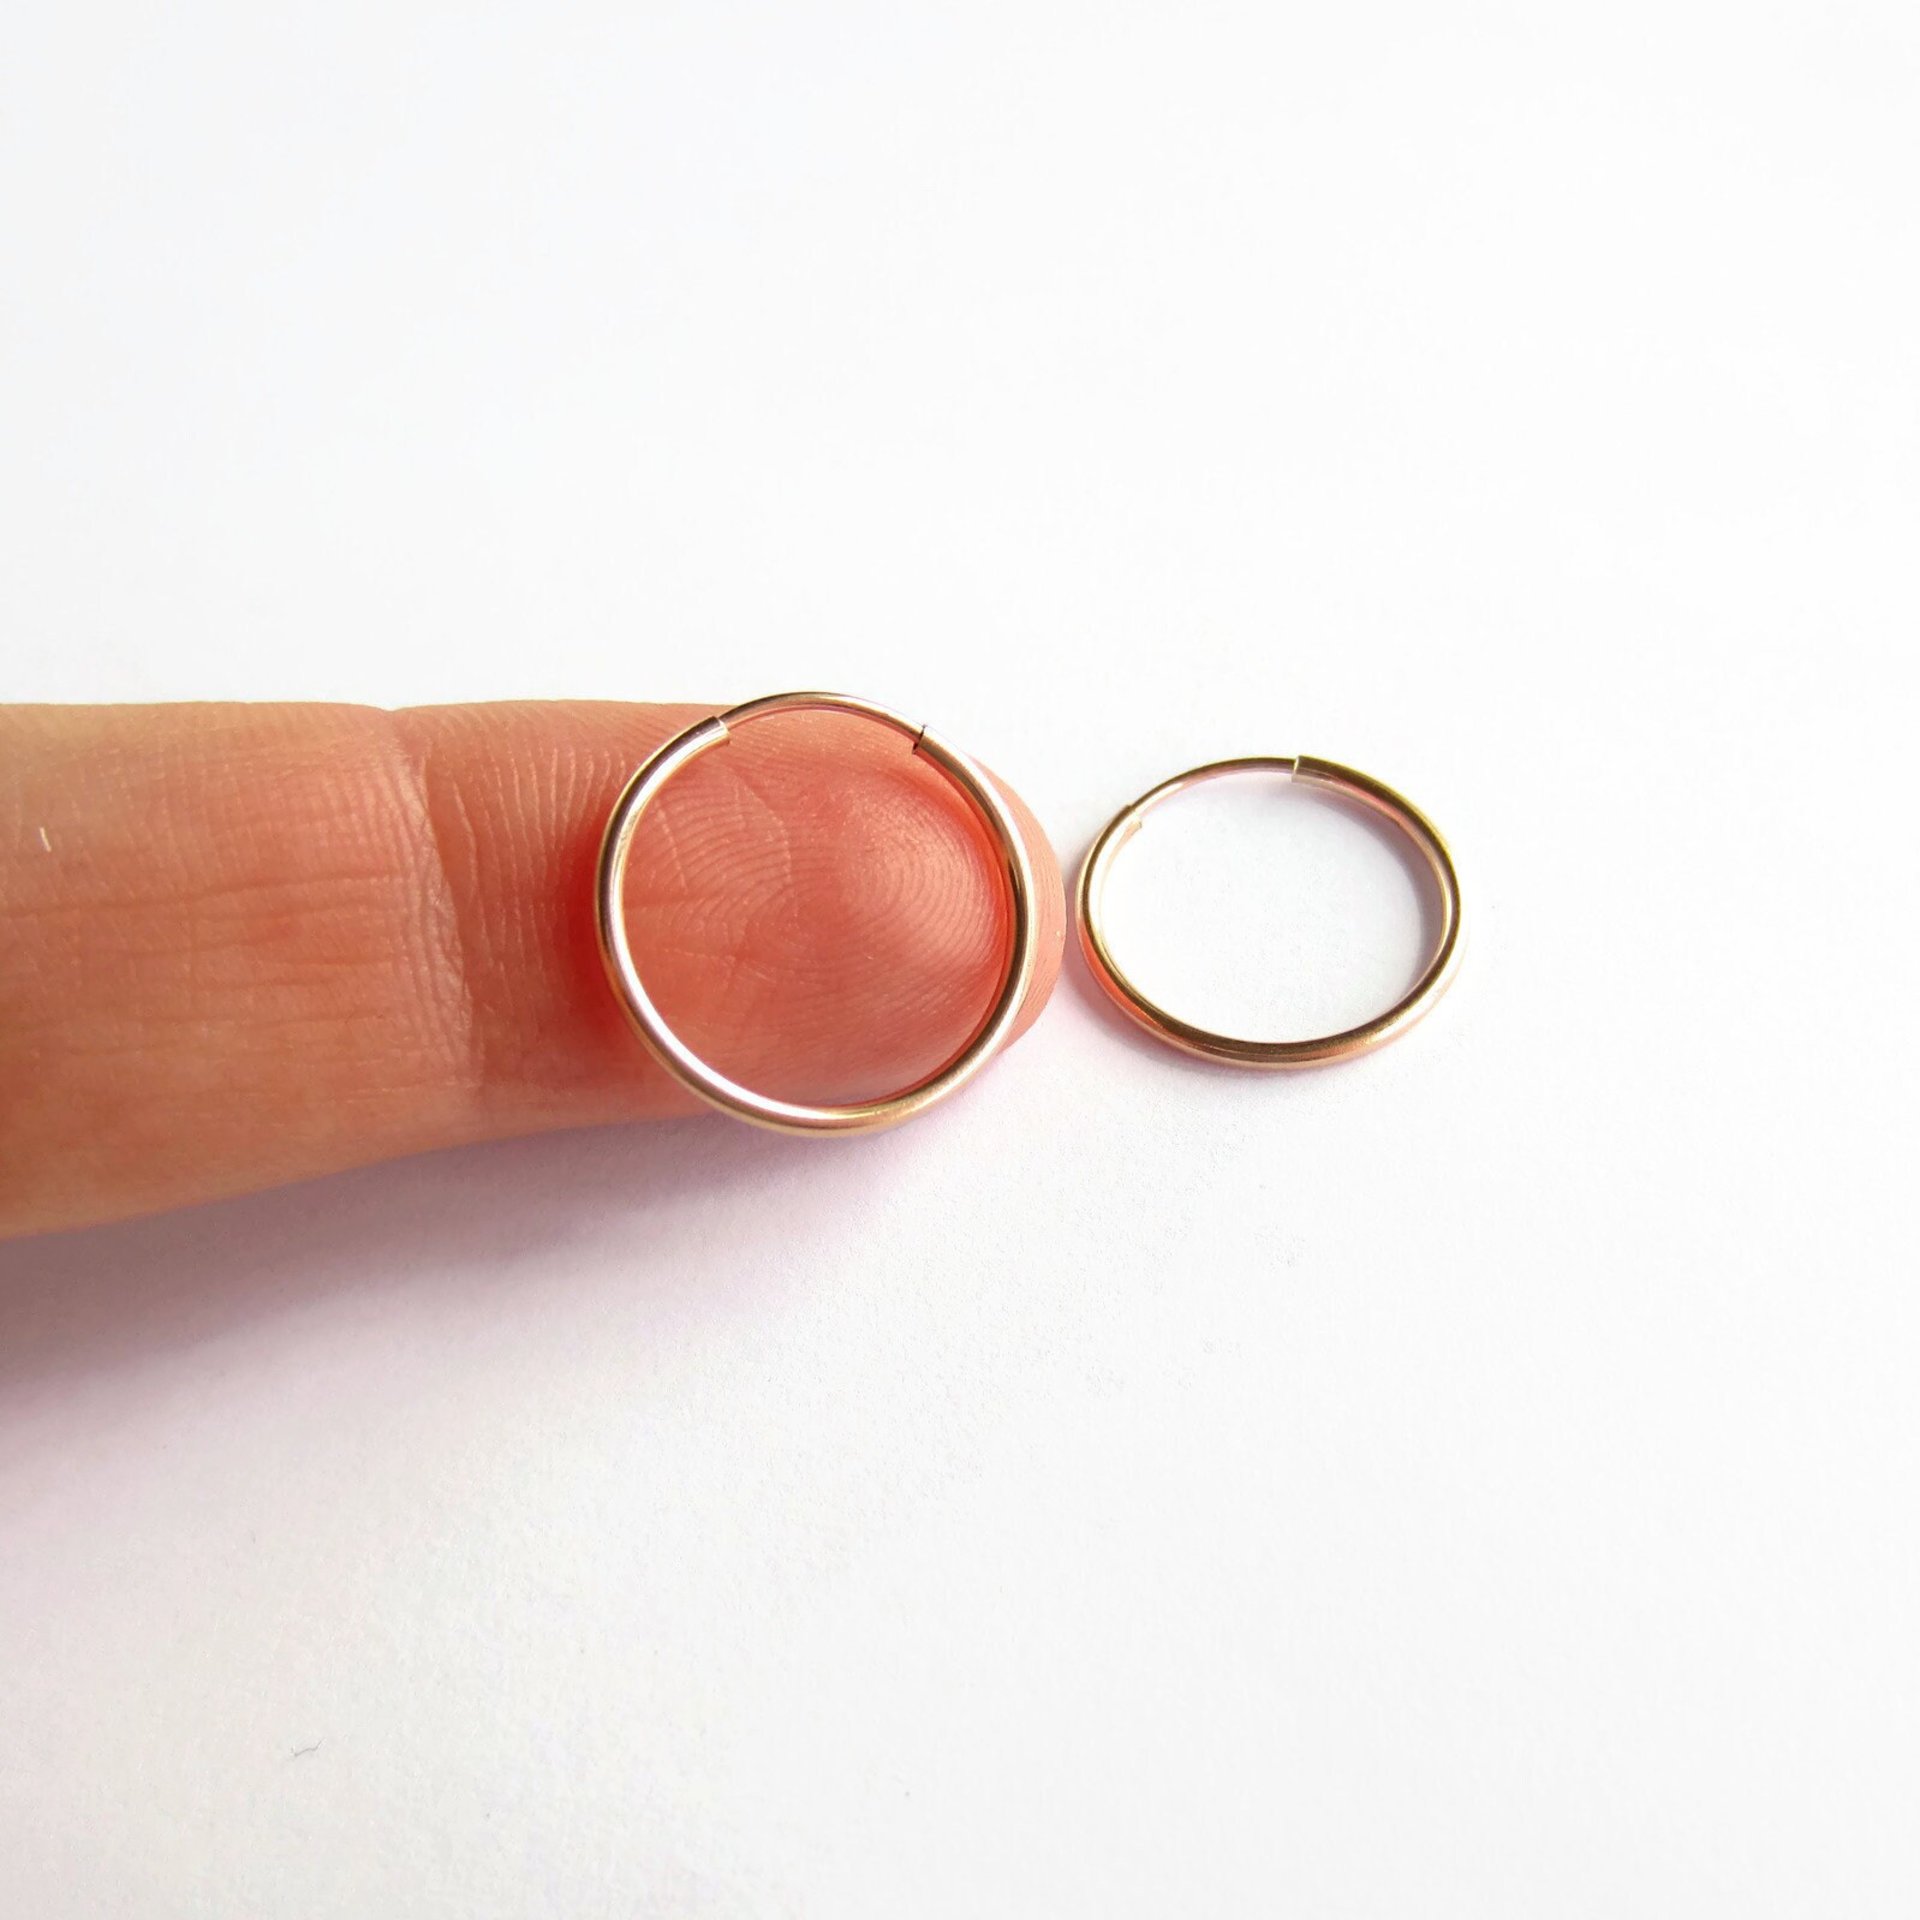 Single or Pair of 16mm 14K Rose Gold Filled Hoop Earrings ~ The Tiny Tree Frog Jewellery